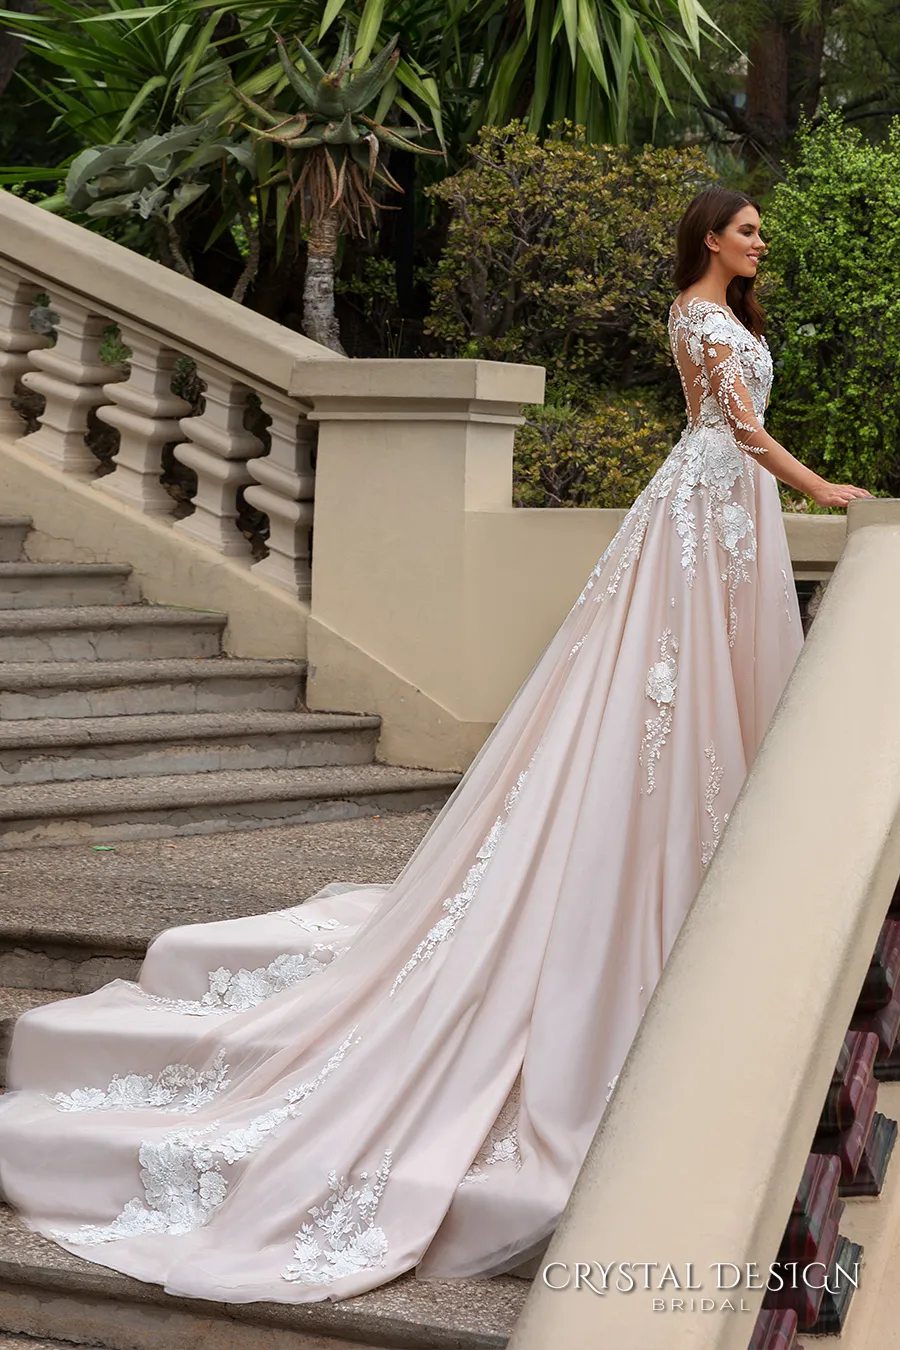 2018 Stunning Designer A Line Wedding Dresses Illusion Neckline Sheer Long Sleeves Full Embroidery Court Train Bridal Gowns7461620